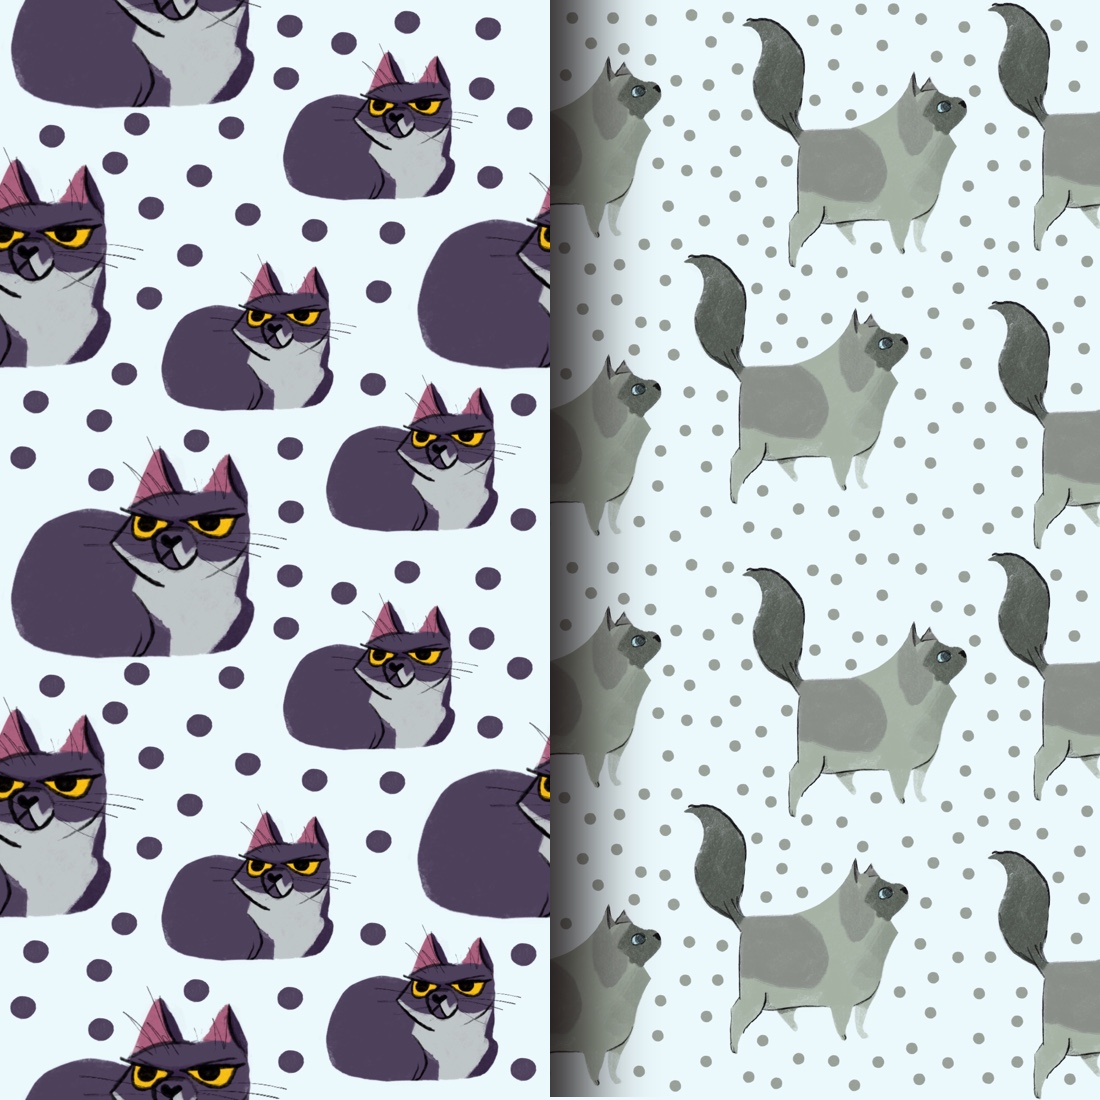 Set of 8 cats pattern preview image.